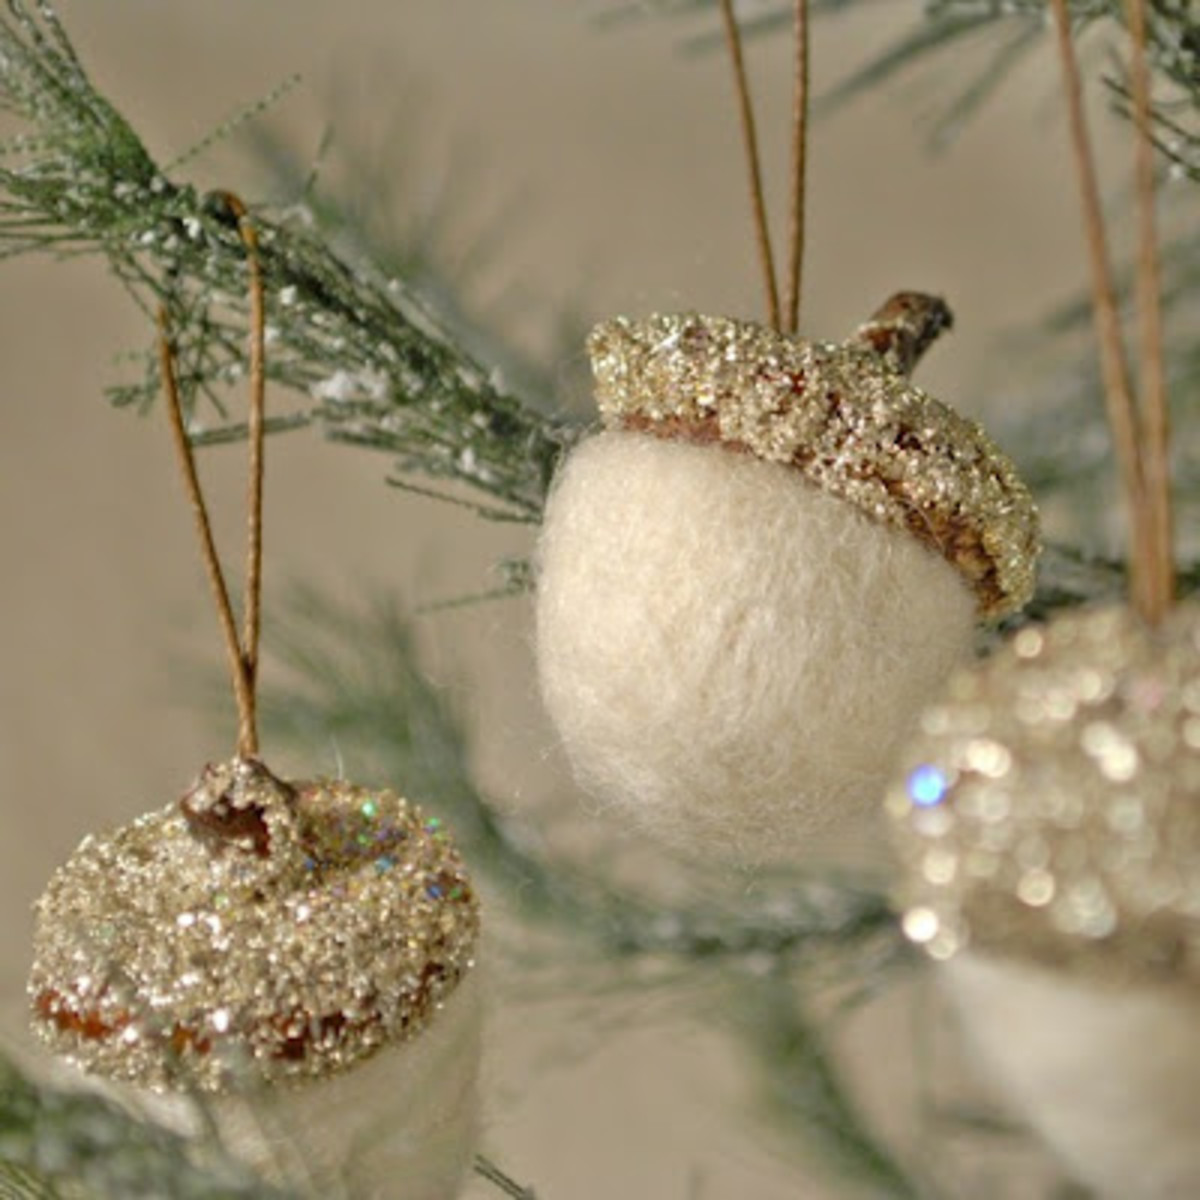 These little gems are next on my list. They'll look wonderful on a gift or tree.